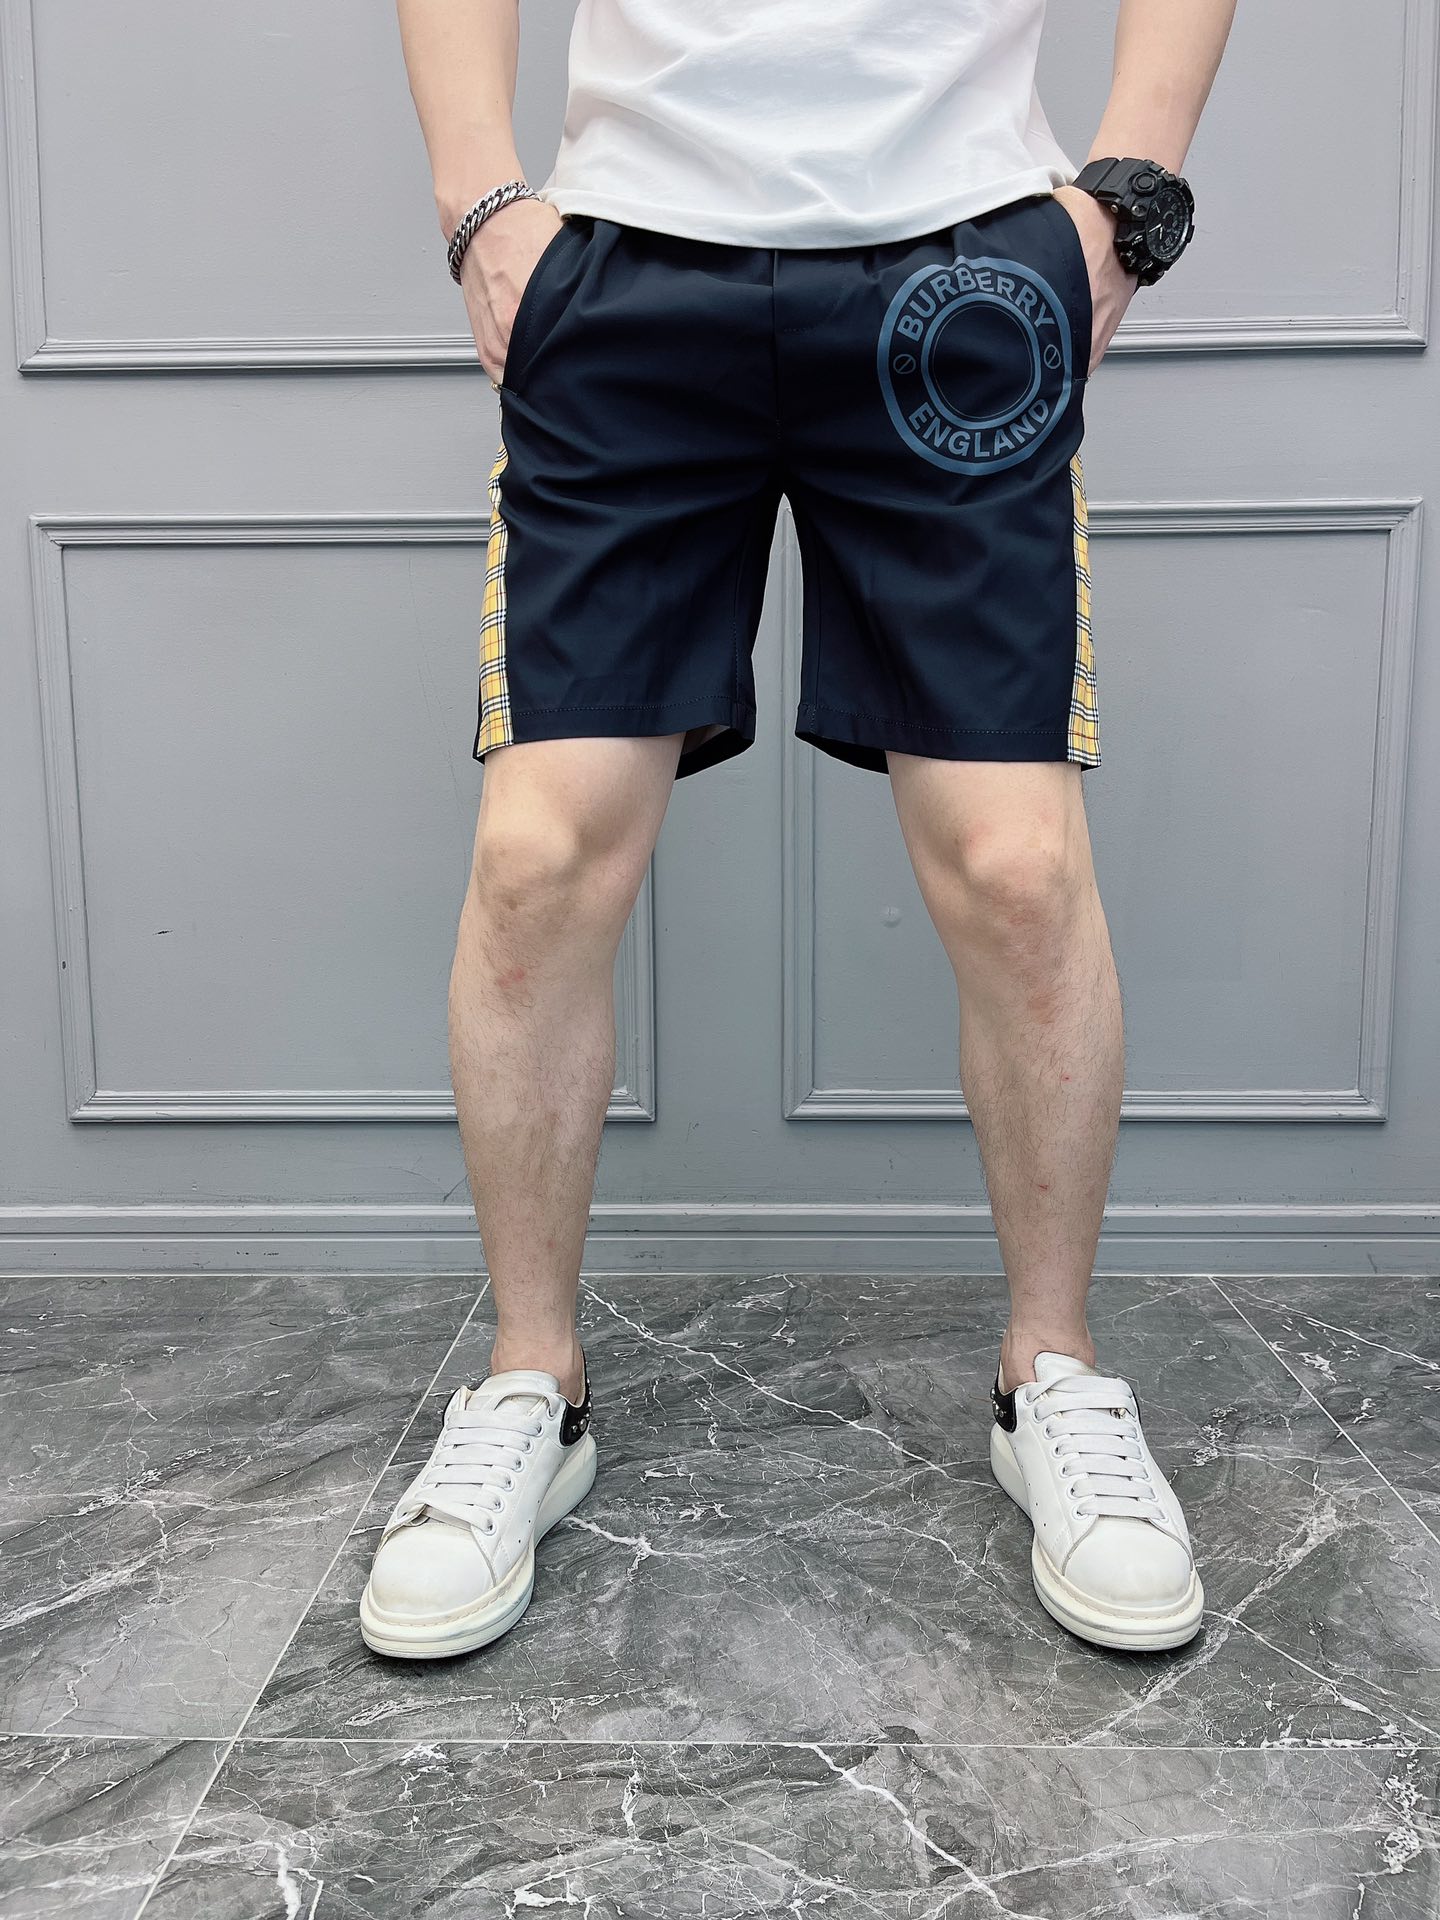 Burberry Clothing Shorts Printing Men Summer Collection Fashion Beach